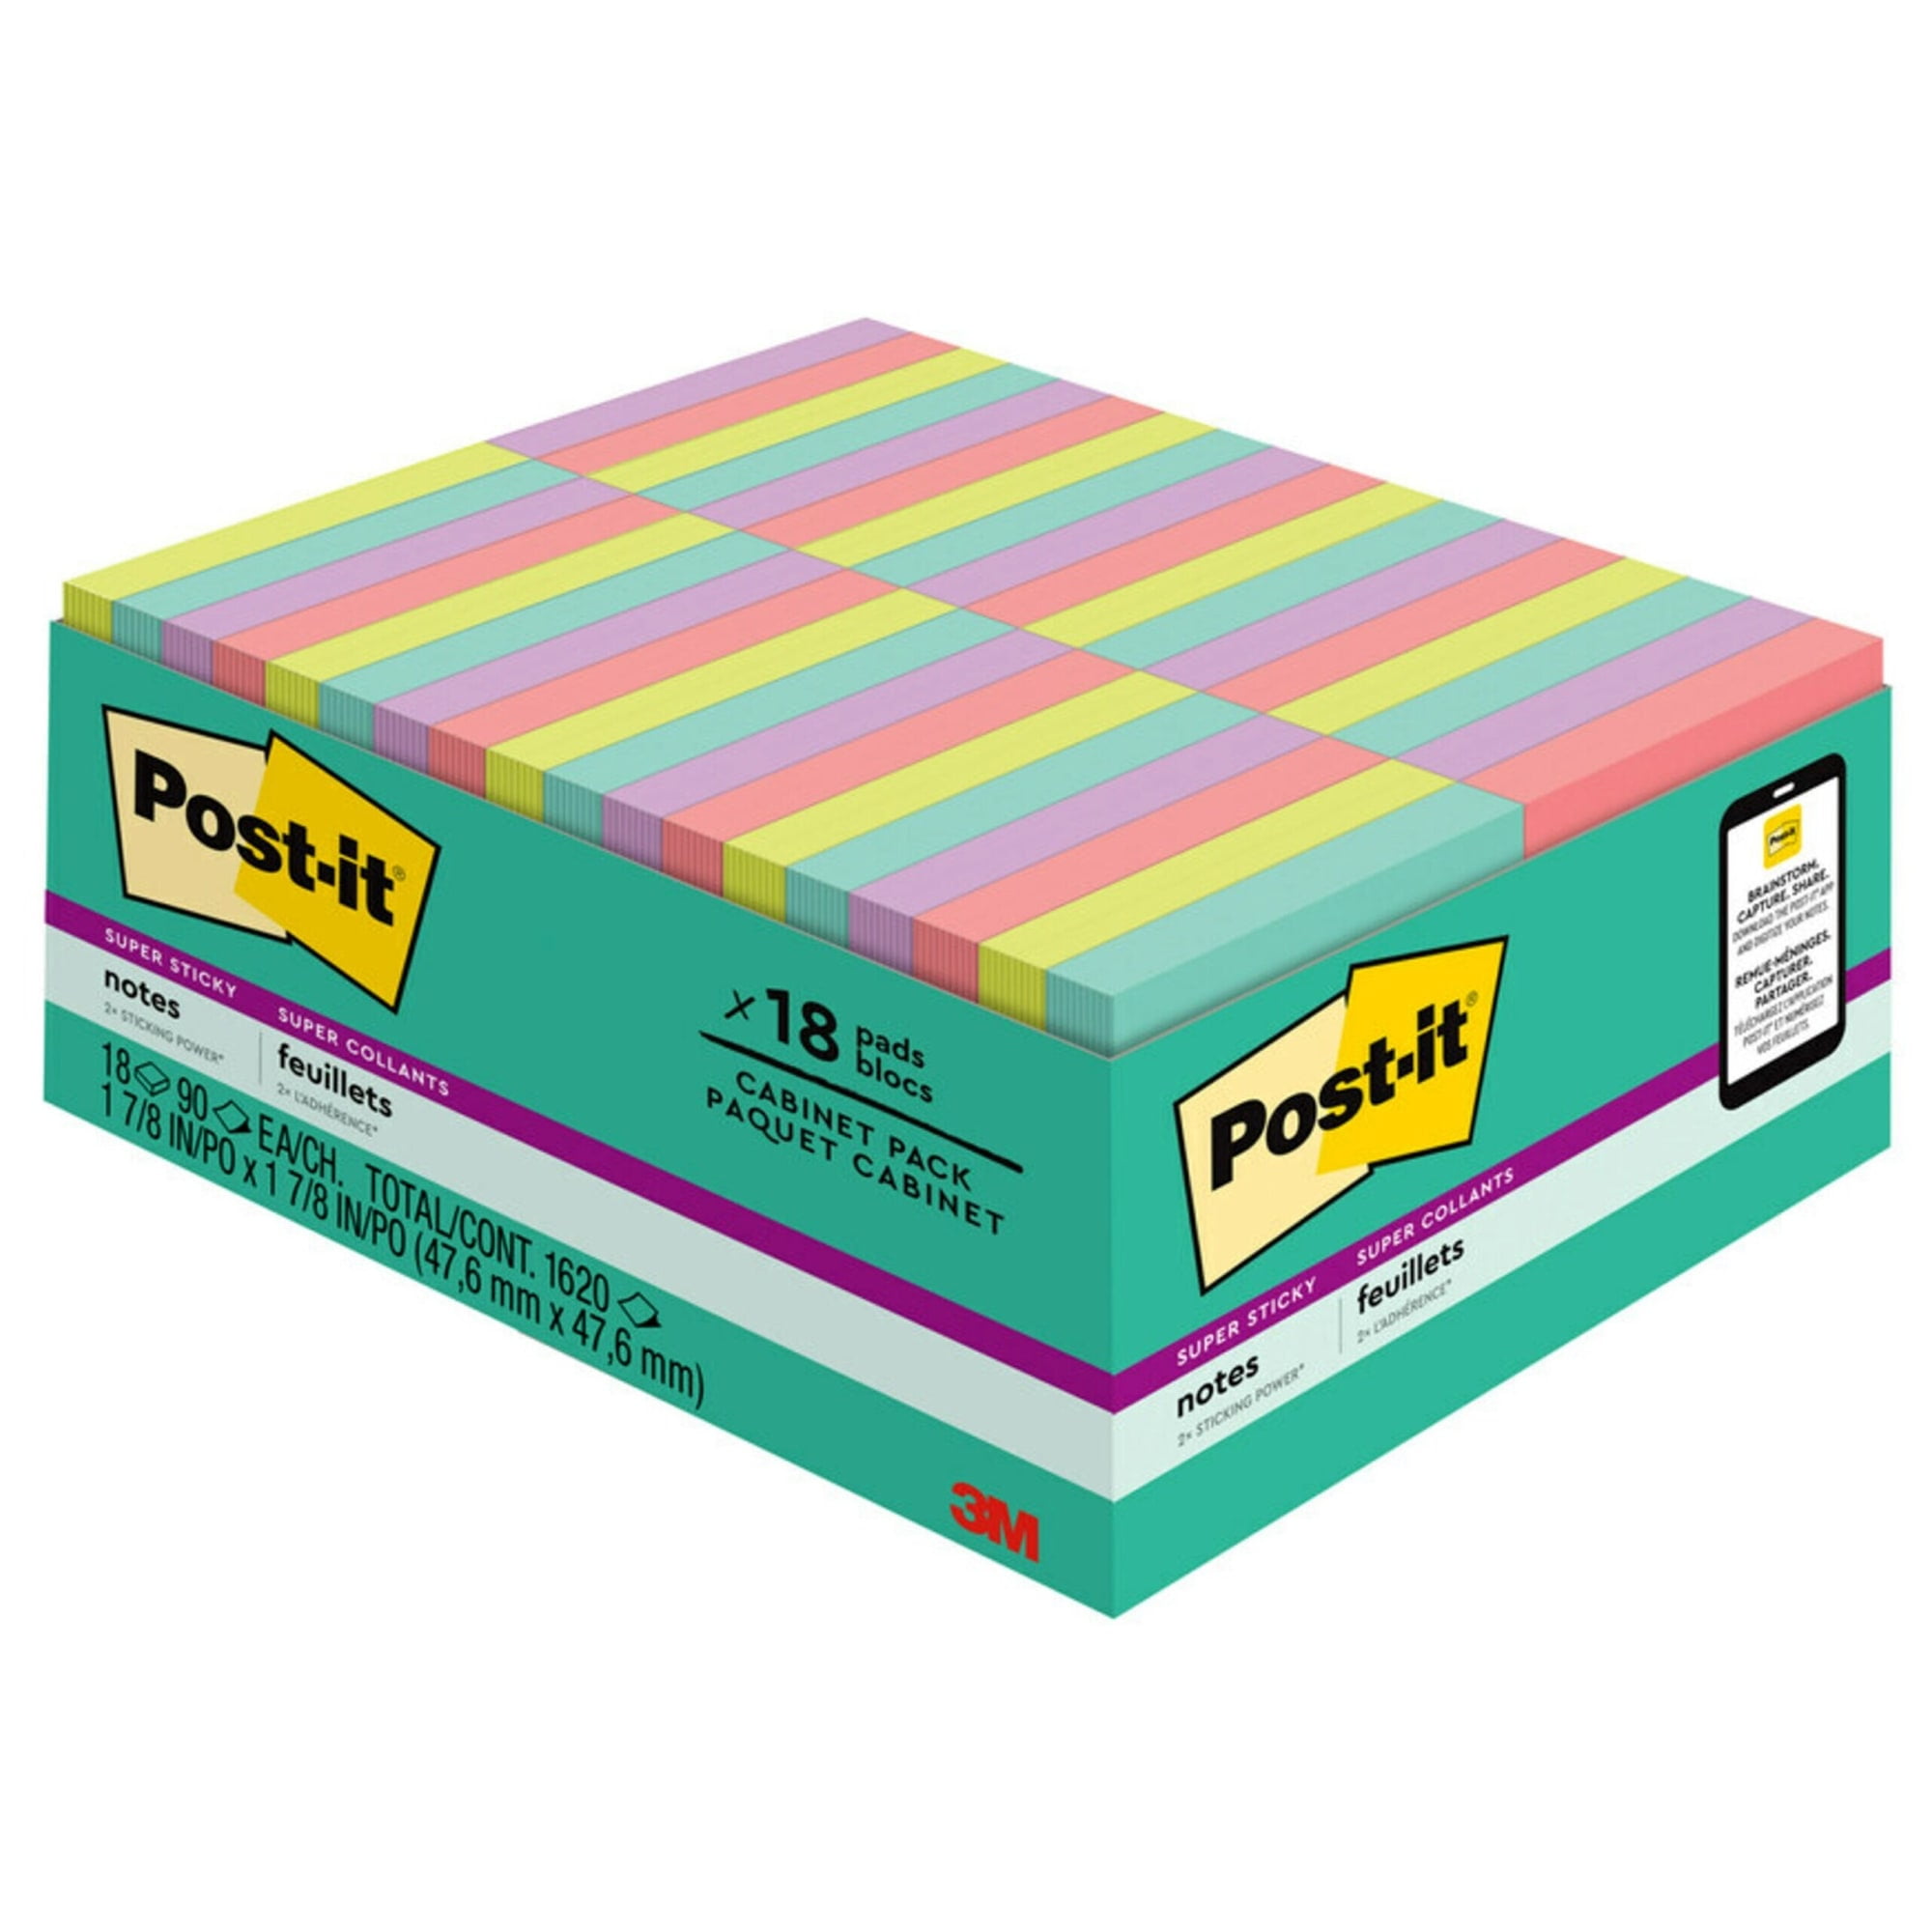 Post-it 6845SSP Super Sticky Meeting Notes, Assorted Colors, 8 x 6 Inch, 45  Sheet (Pack of 4)